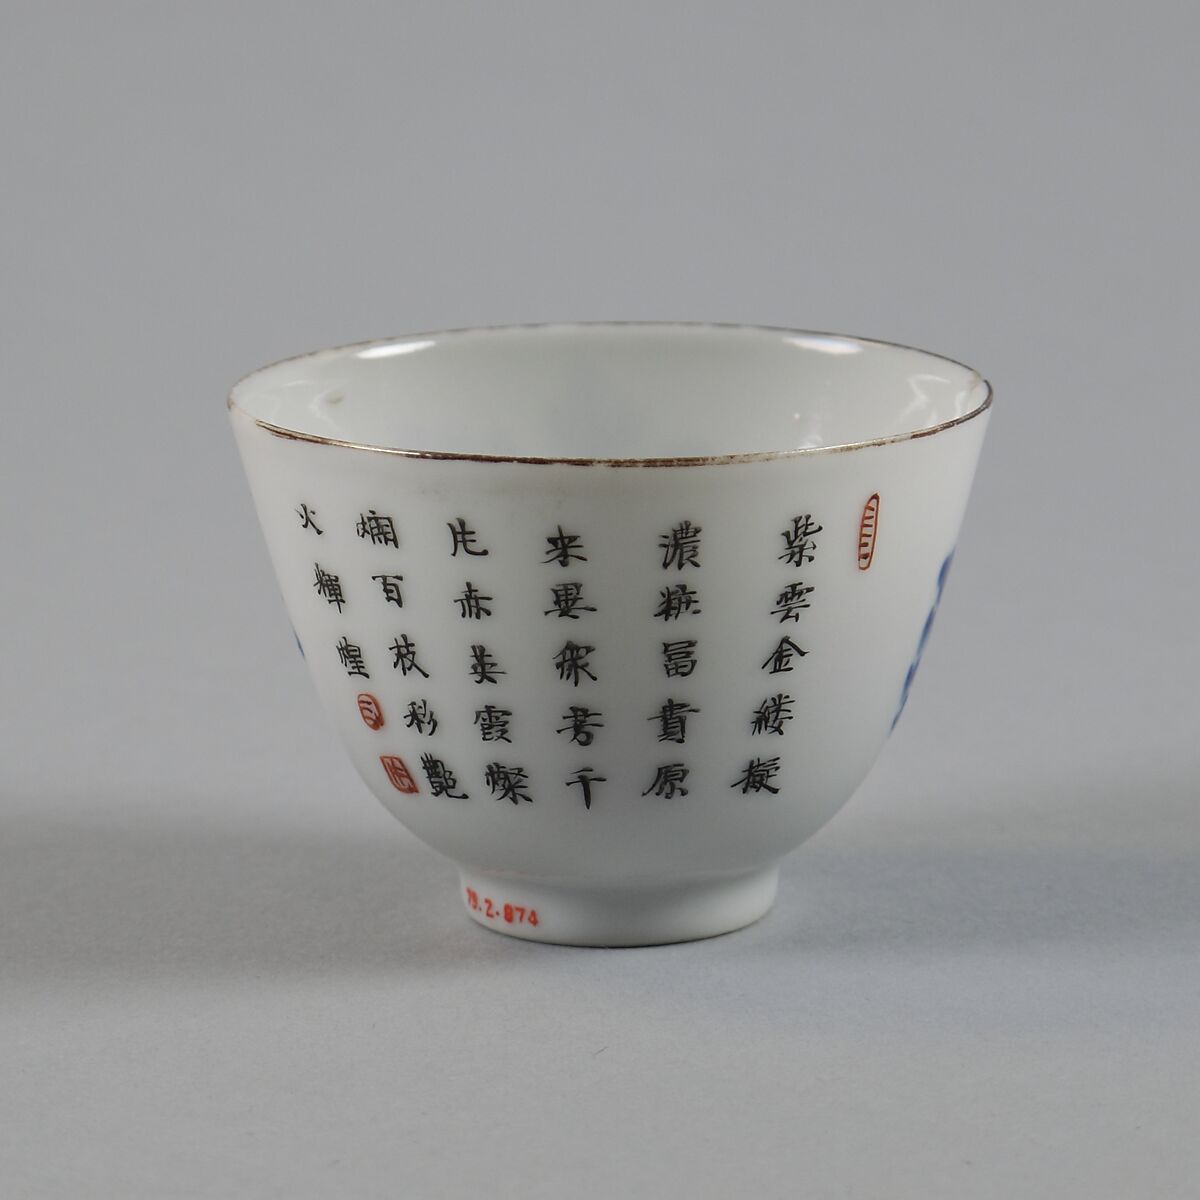 Cup with flowers and poem, Porcelain painted in overglaze polychrome enamels (Jingdezhen ware), China 